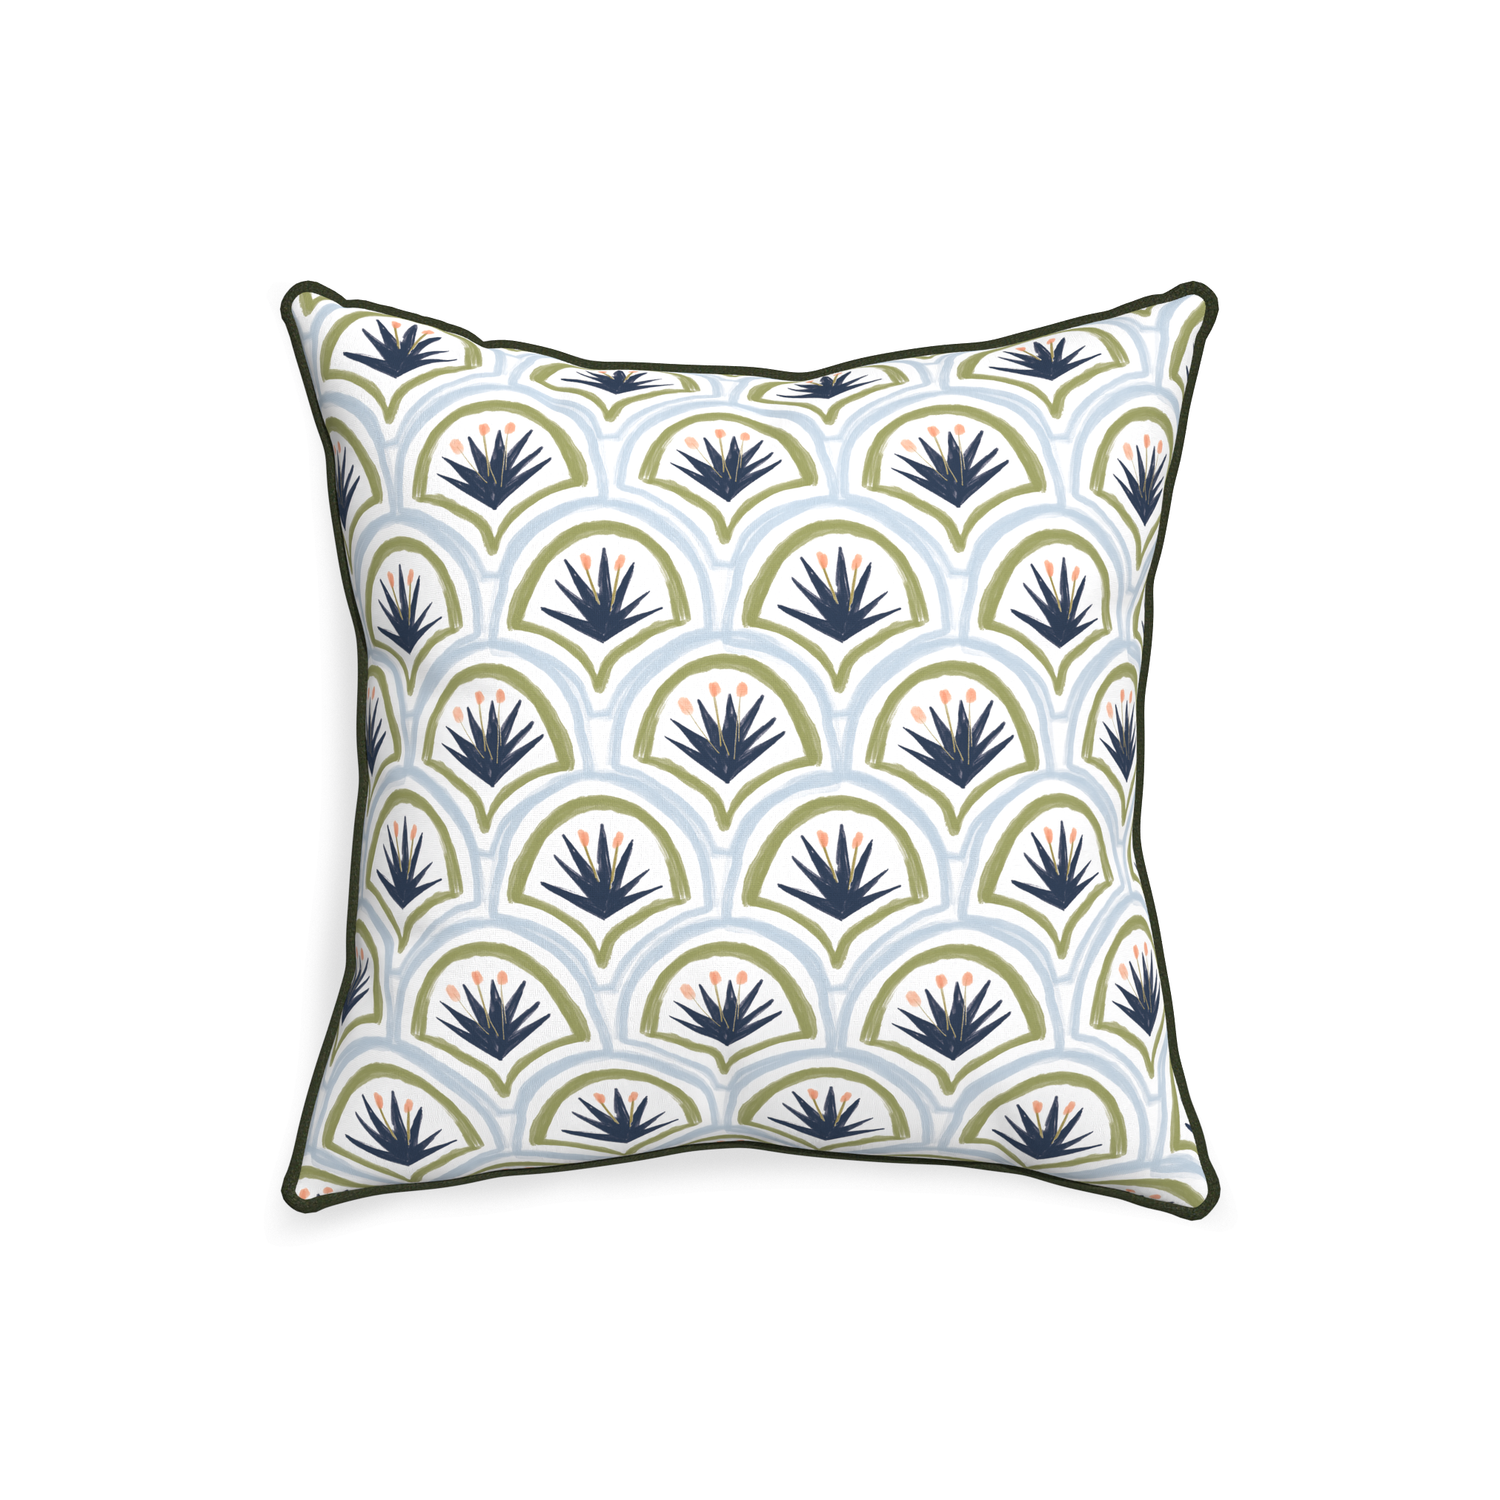 20-square thatcher midnight custom art deco palm patternpillow with f piping on white background